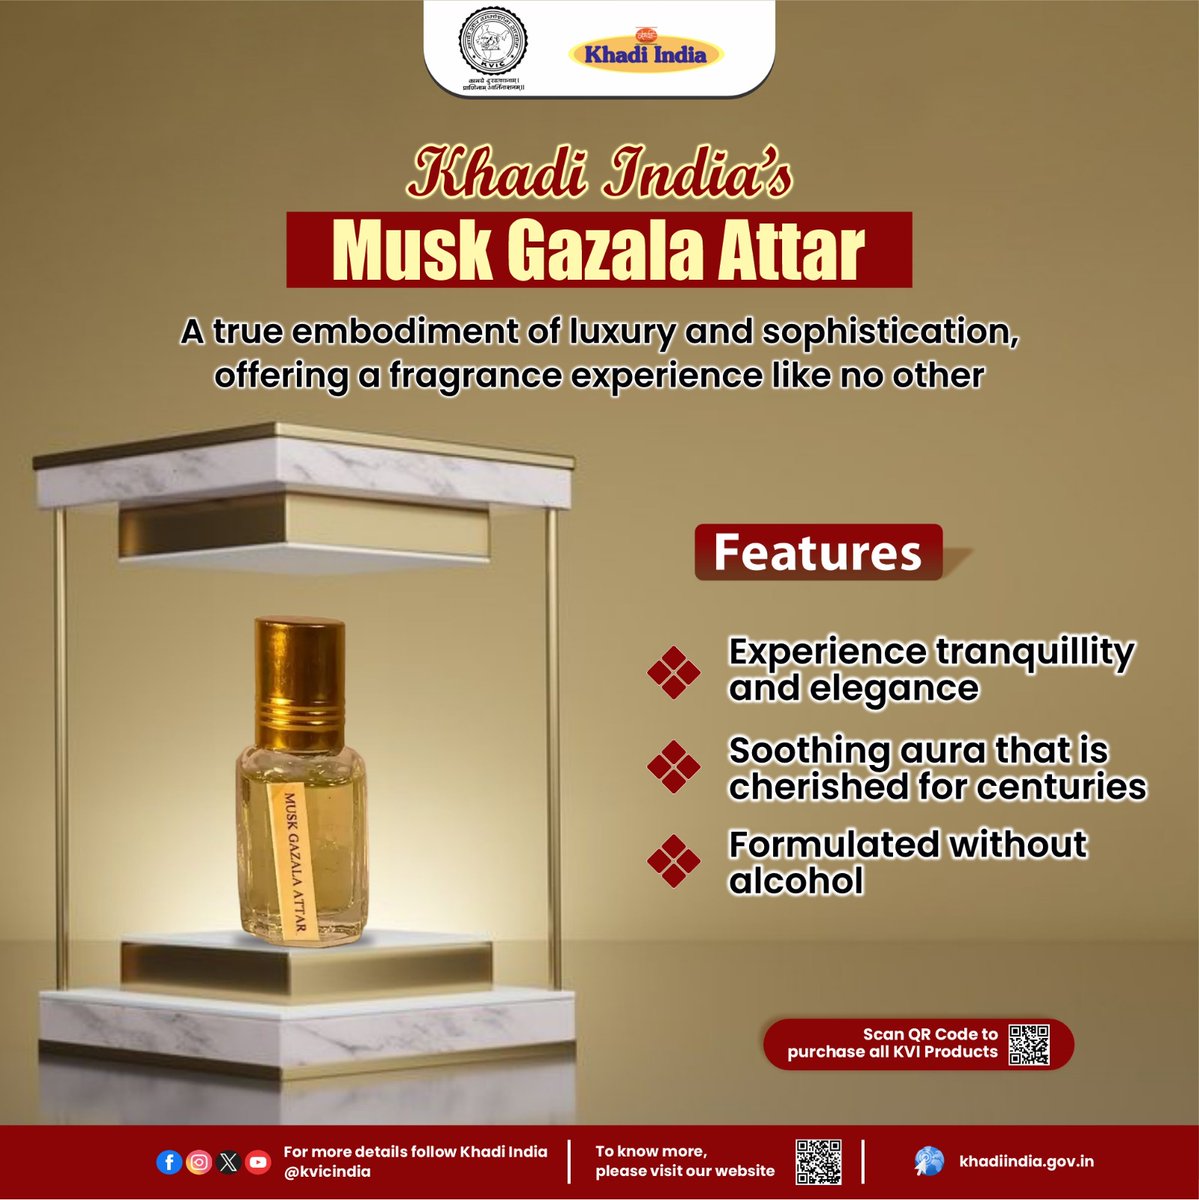 Khadi India’s Musk Gazala Attar – a pure, natural essence crafted from the finest flower absolutes derived from musk amber. This exquisite attar is a true embodiment of luxury and sophistication, offering a fragrance experience like no other. Visit your nearest #Khadi store or